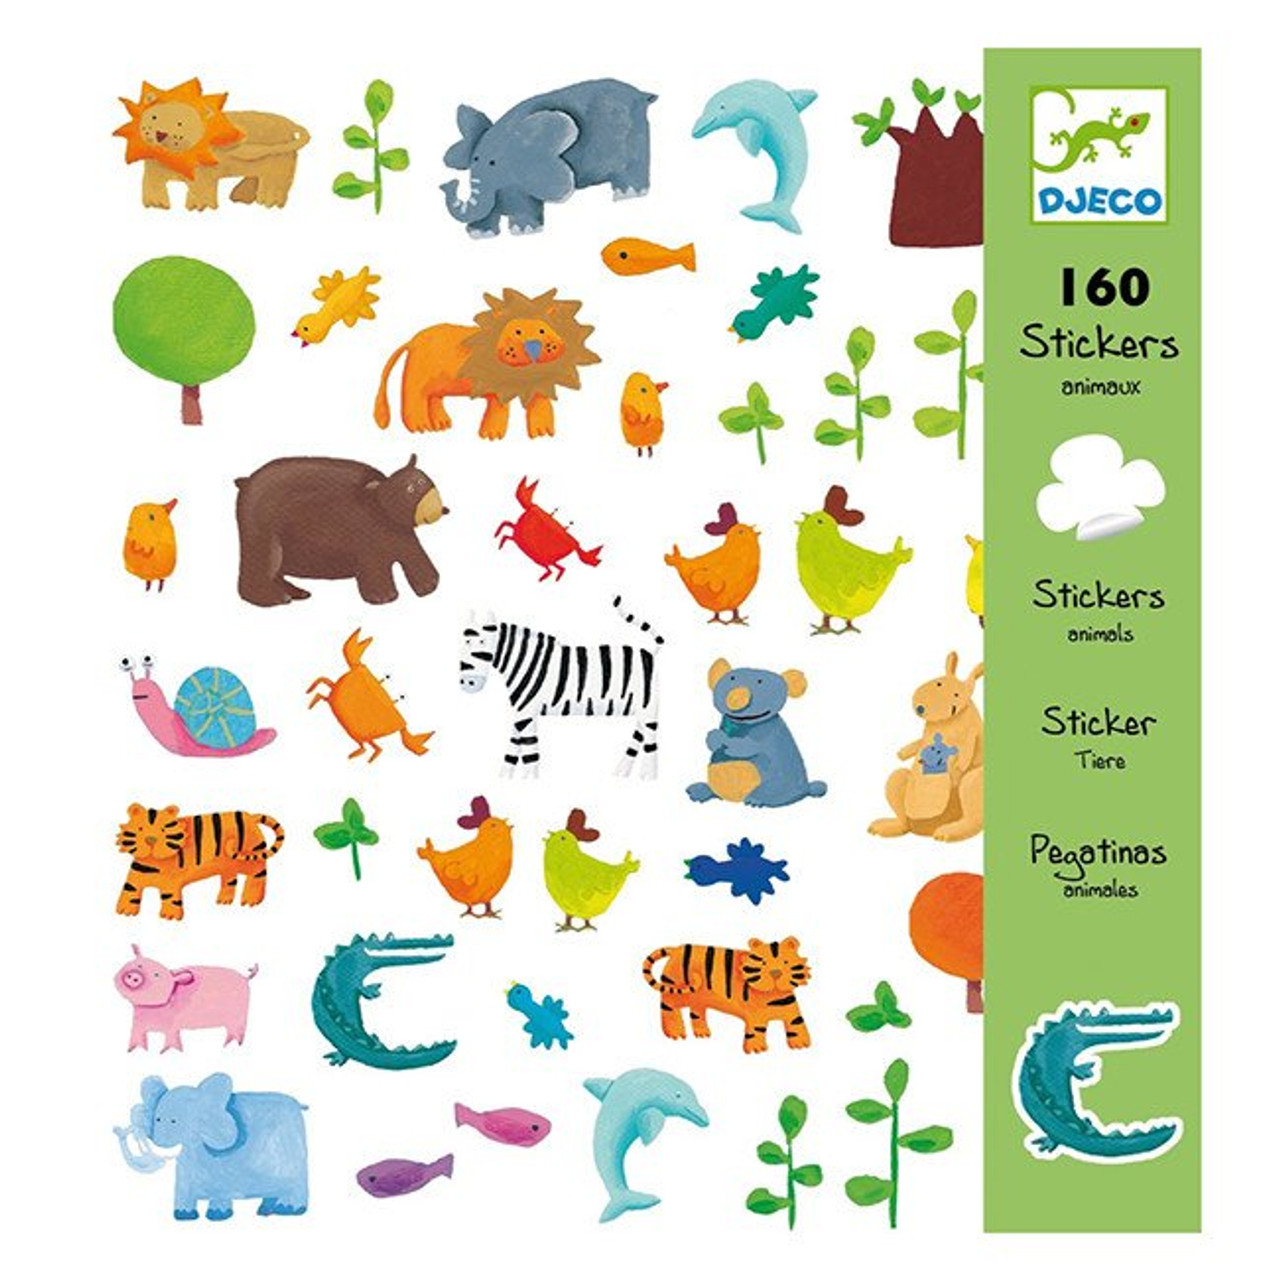 Stickers repositionnables - Animaux - Djeco - Découpage - Pliage